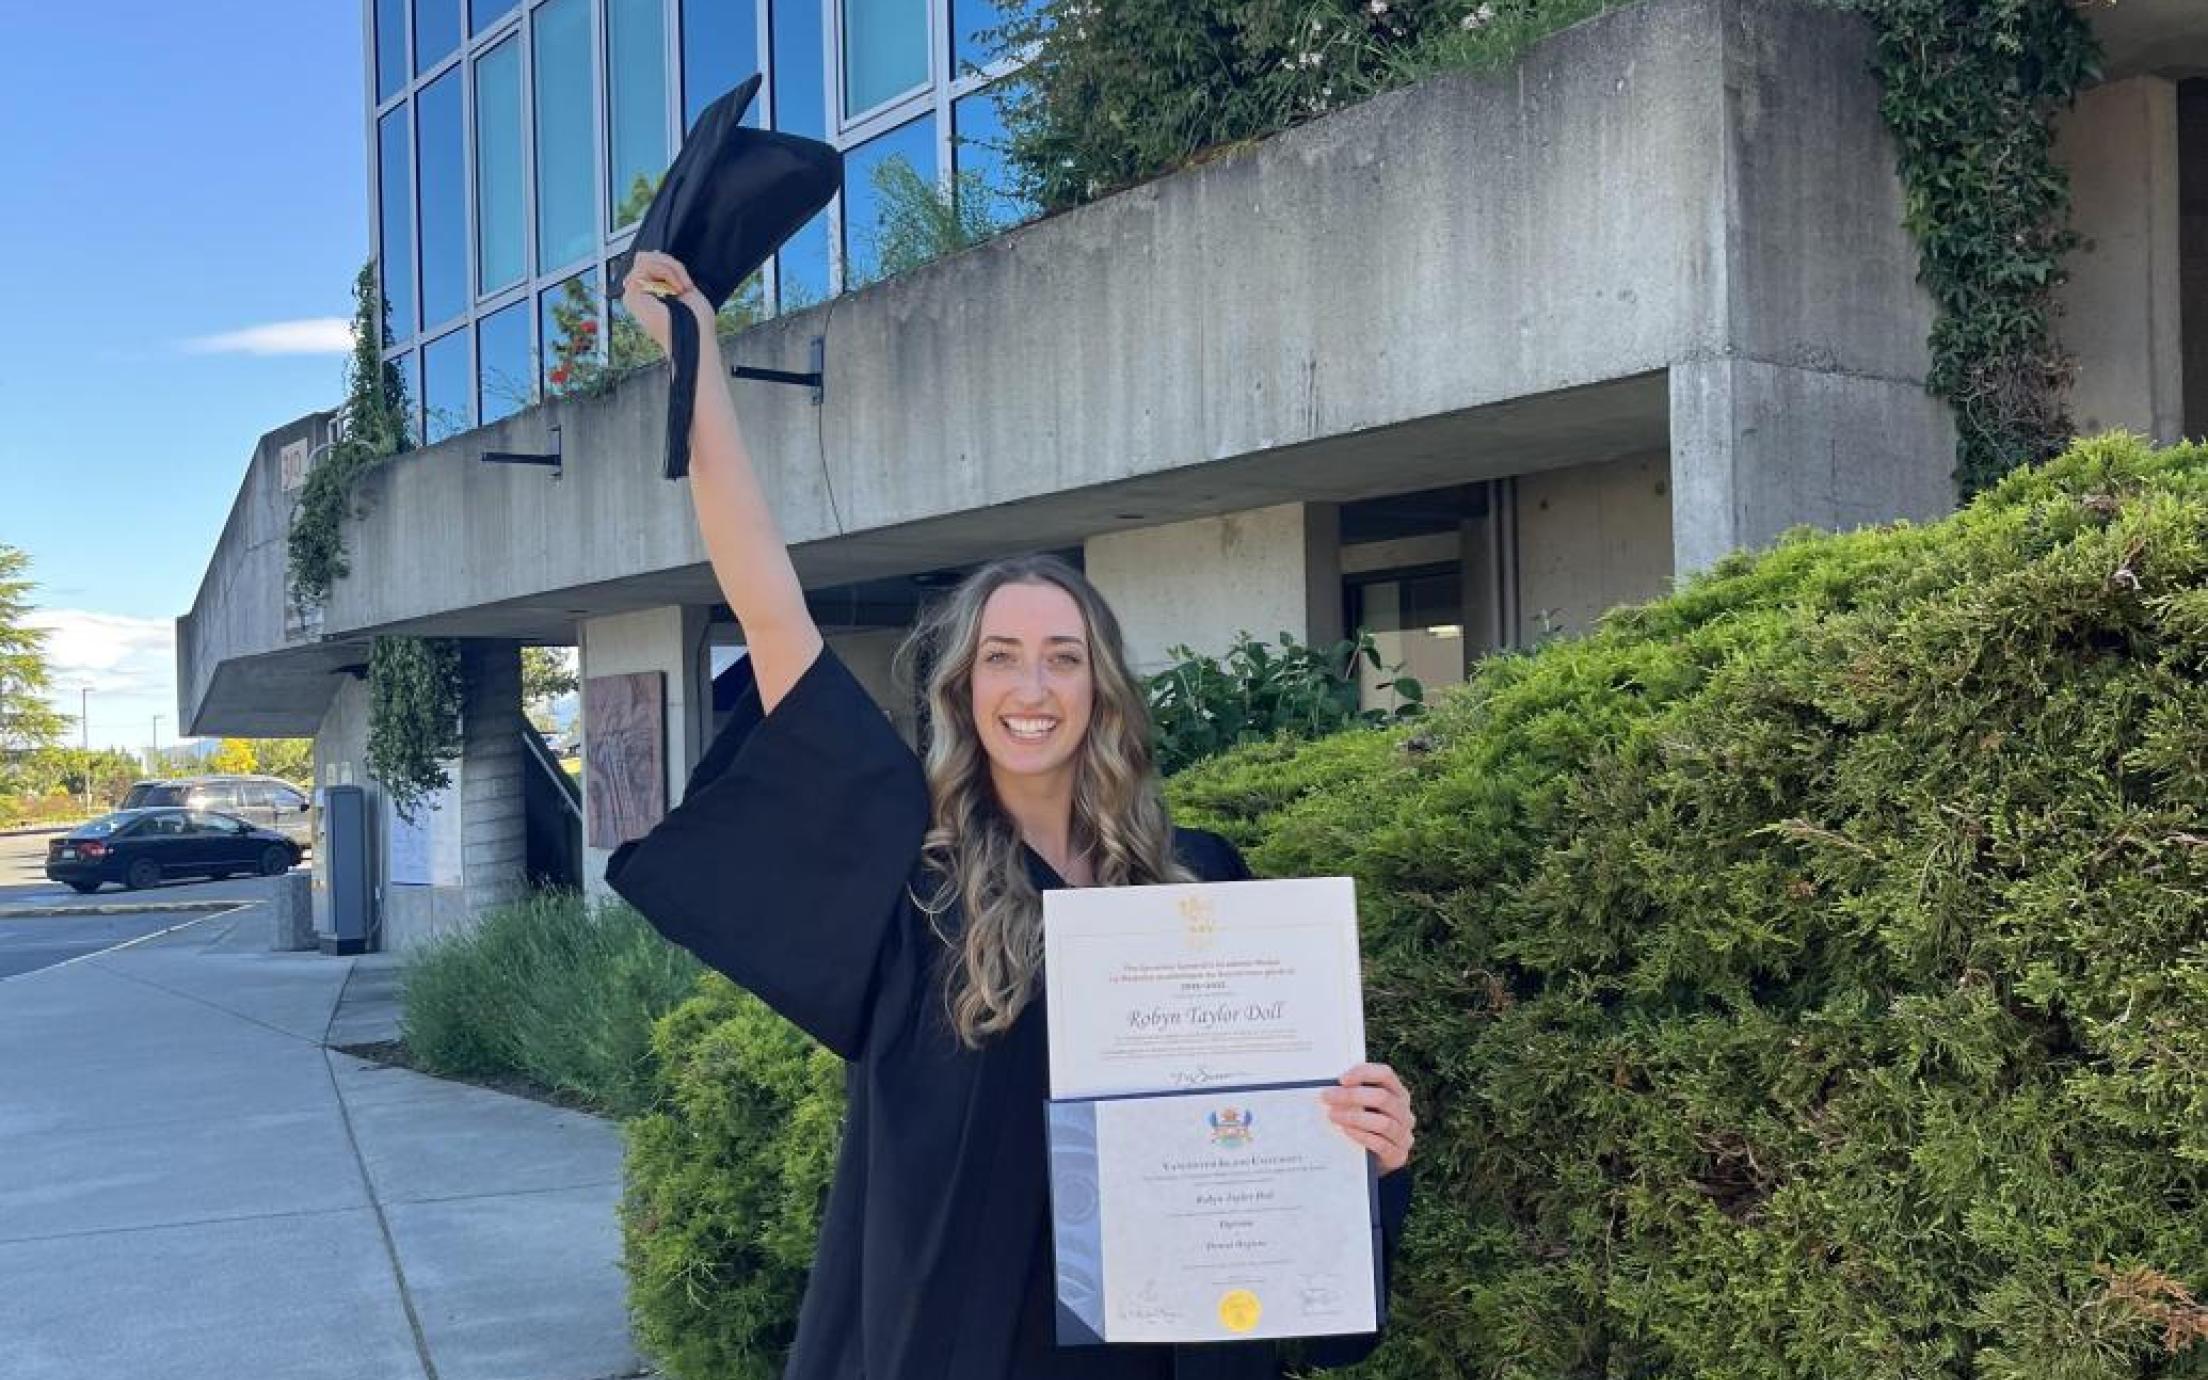 VIU graduate Robyn Doll smiling with diploma